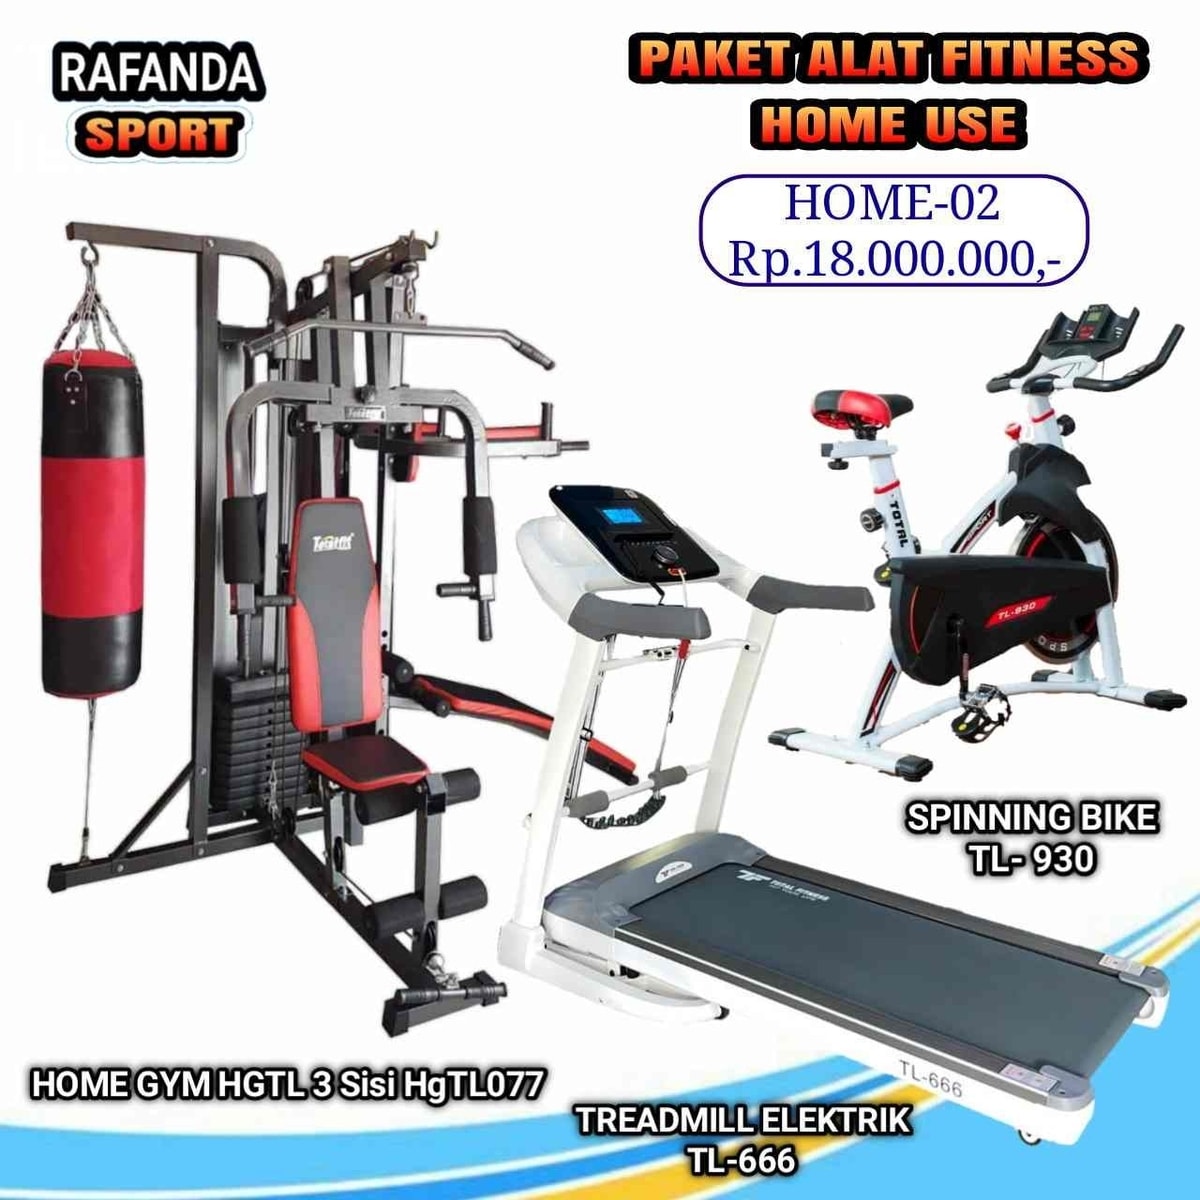 Paket Fitness Home Use - Home 2